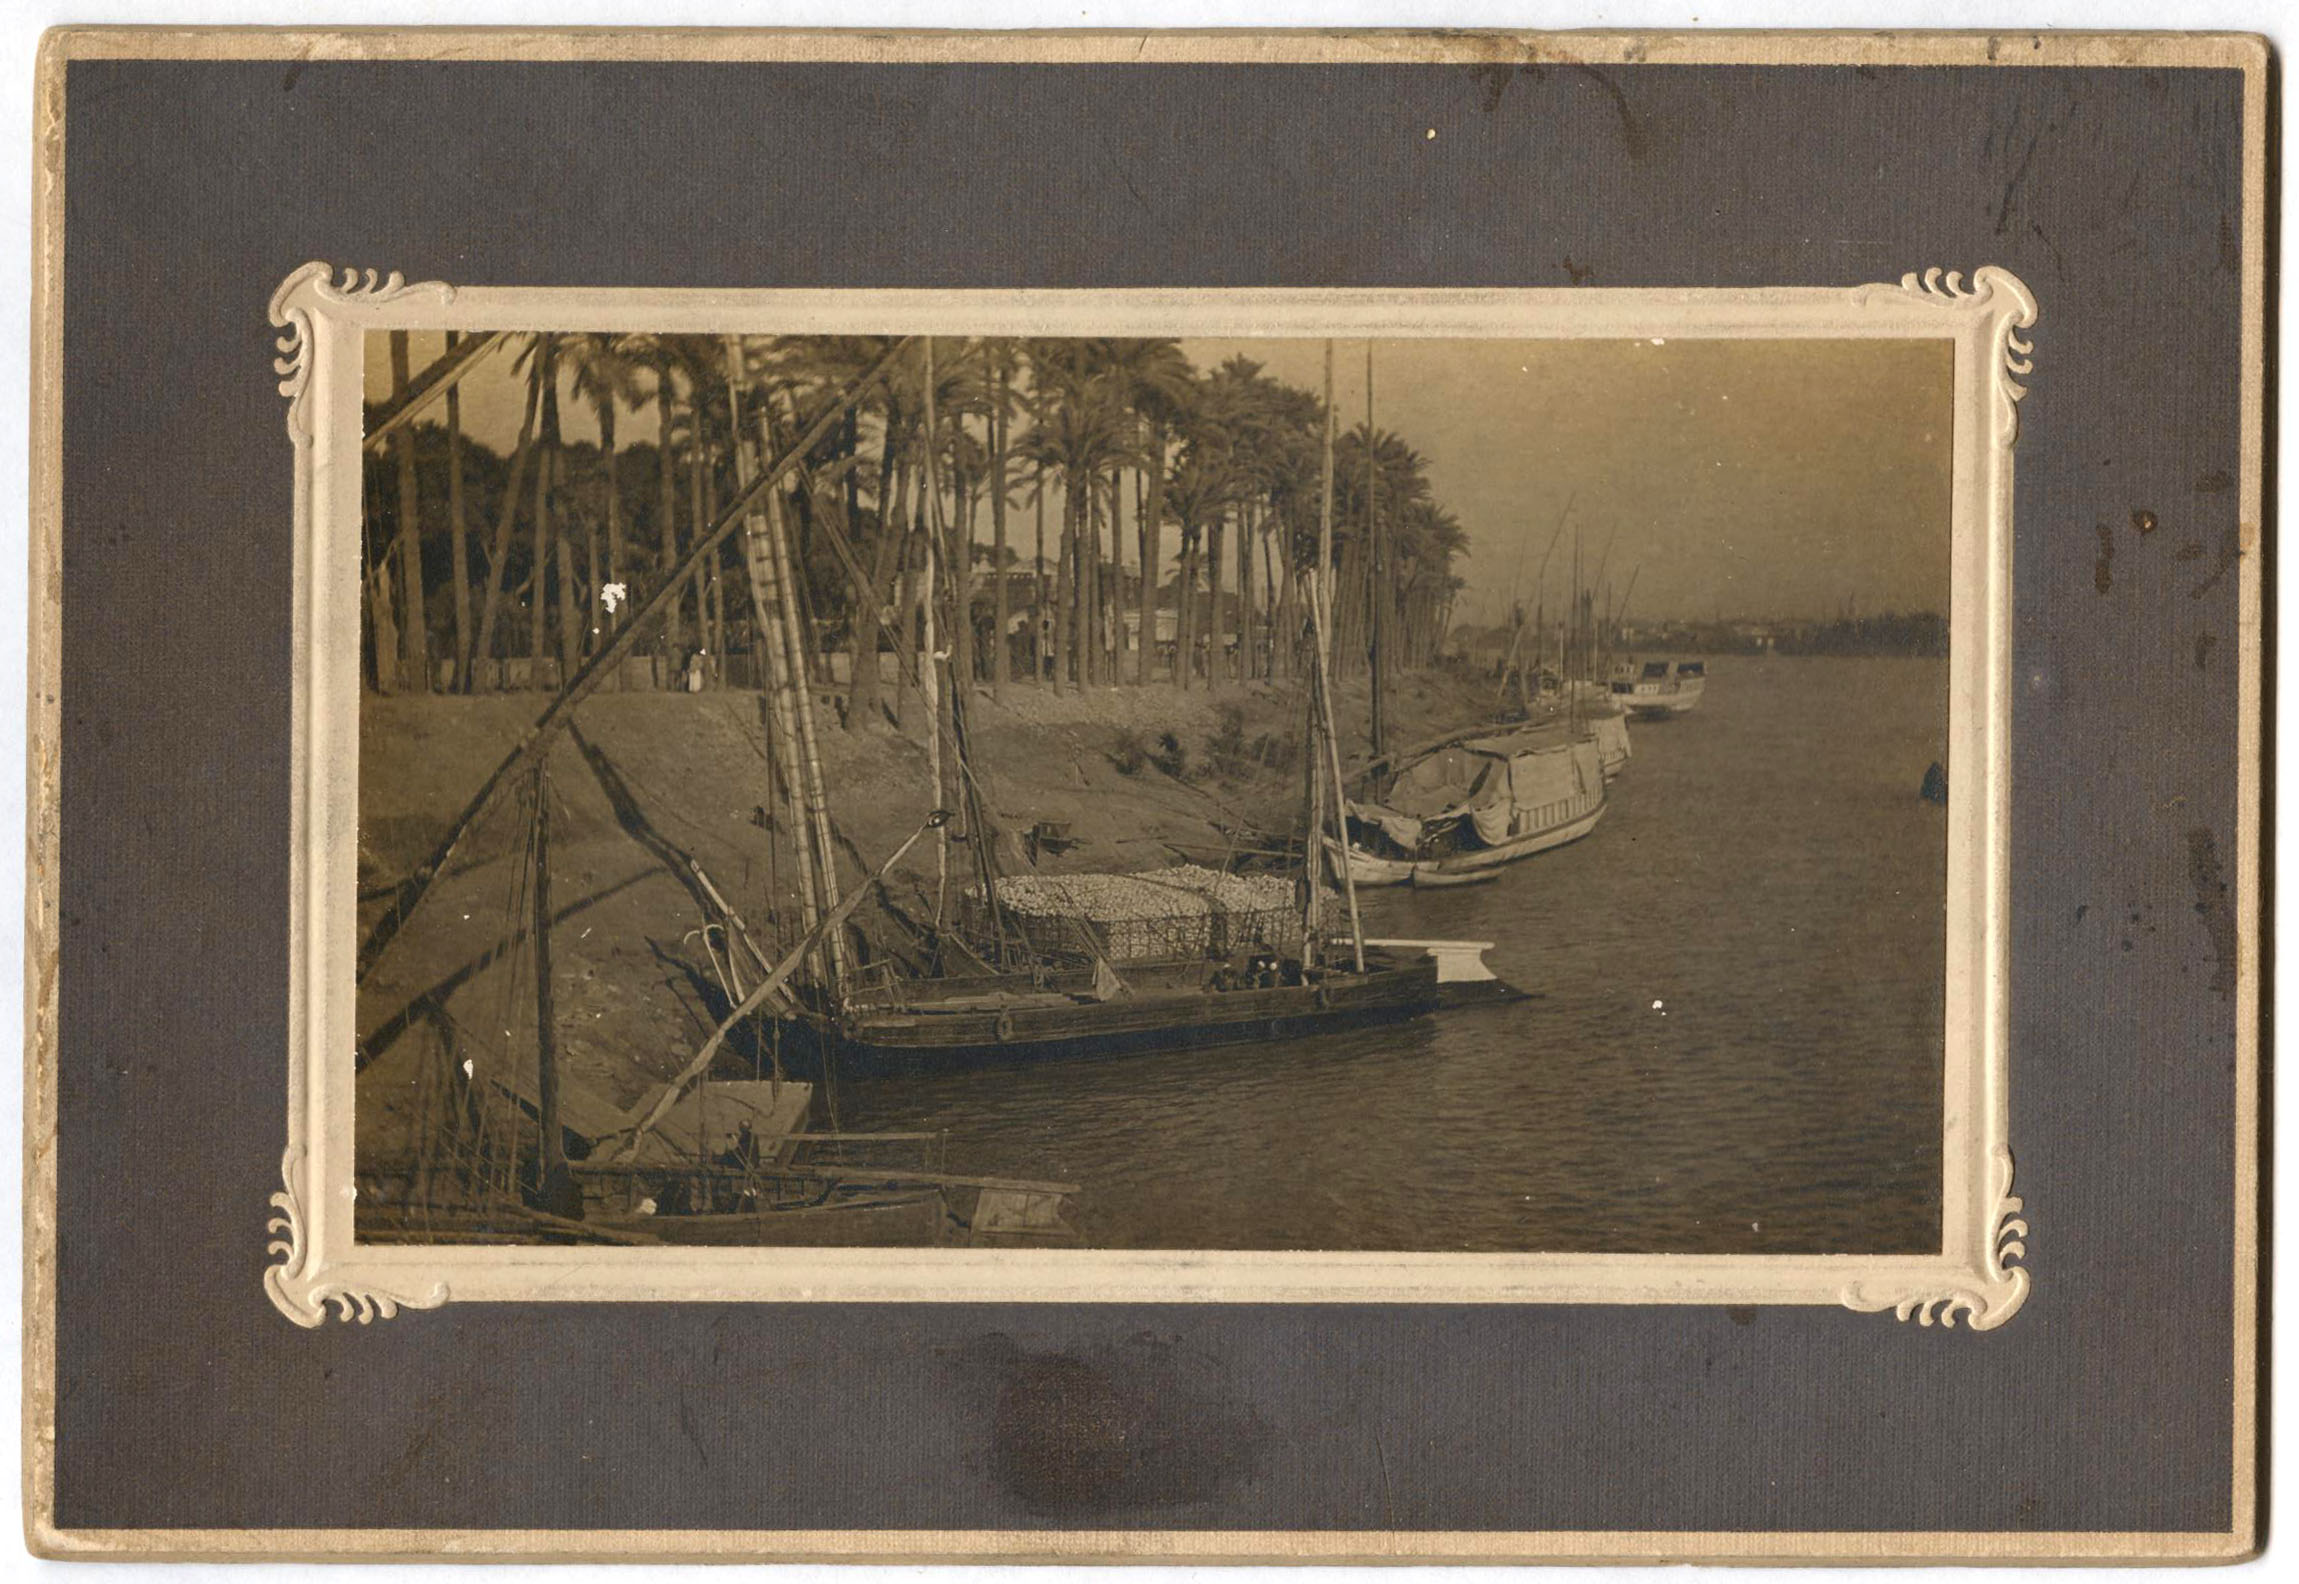 The Nile at Cairo - A large Cabinet Card in the Frank Lesher Collection